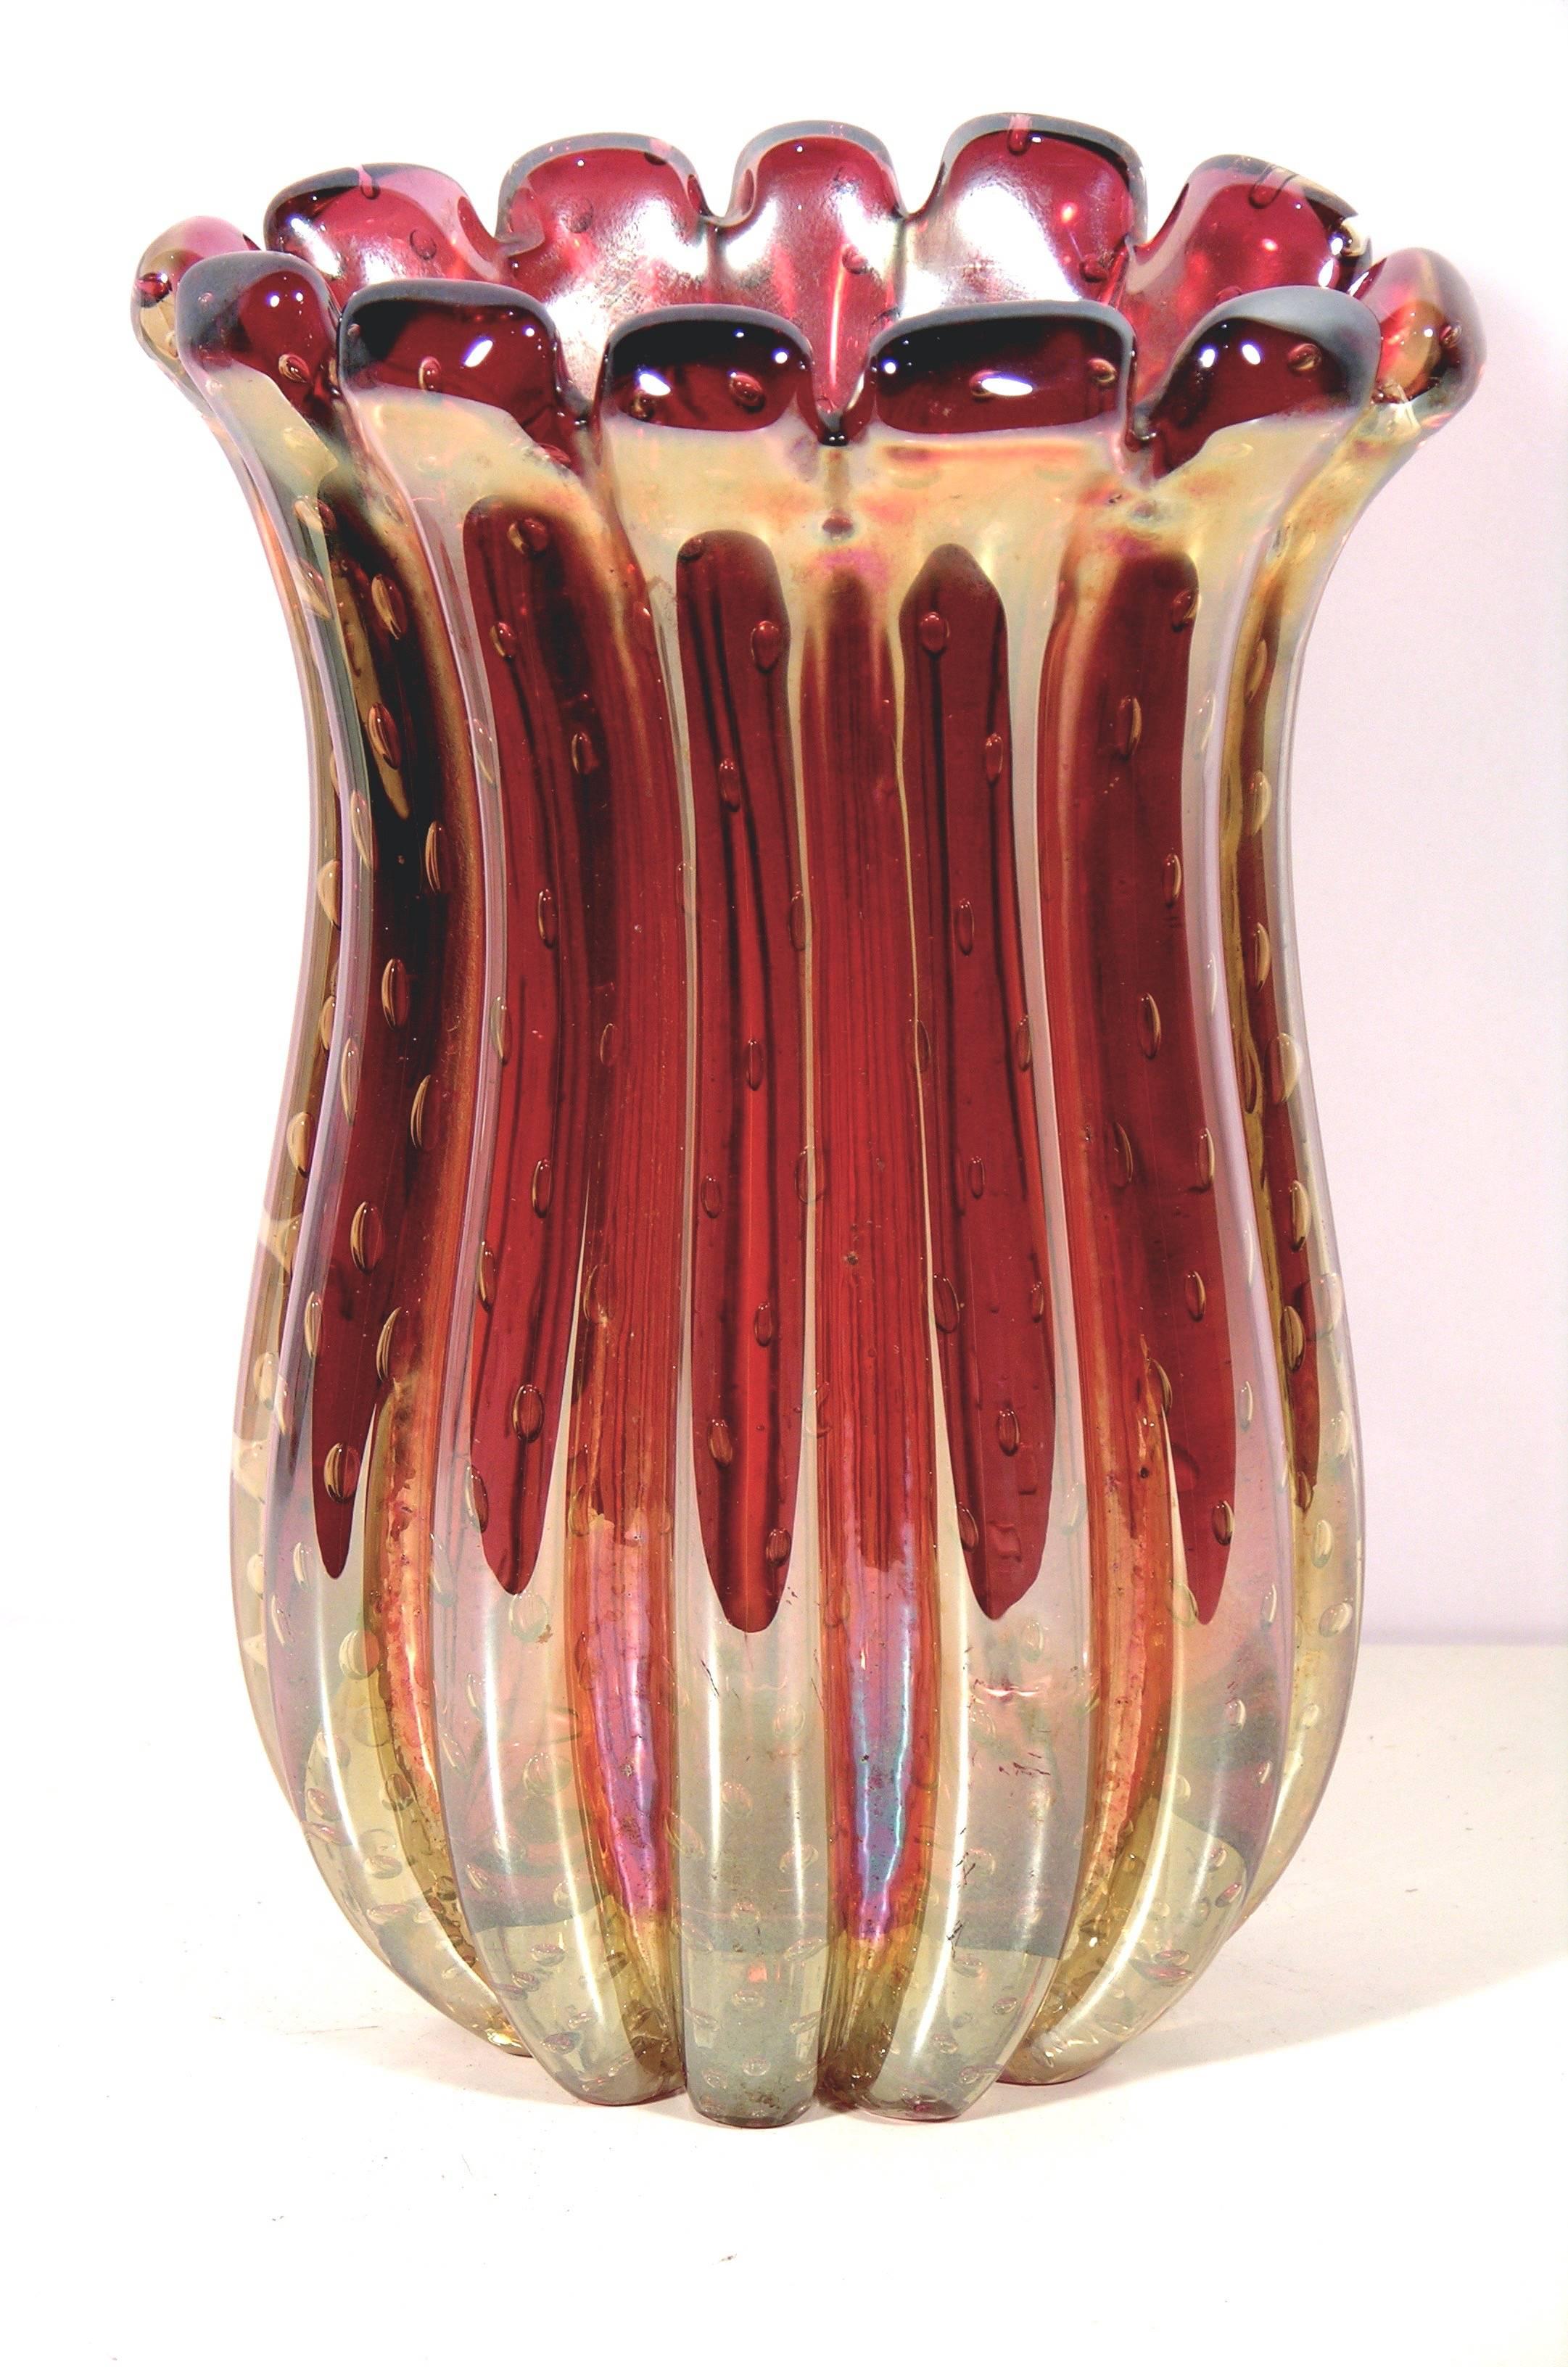 1950s Italian Vintage Iridescent Ruby Red Vase Attributed to Ercole Barovier 1